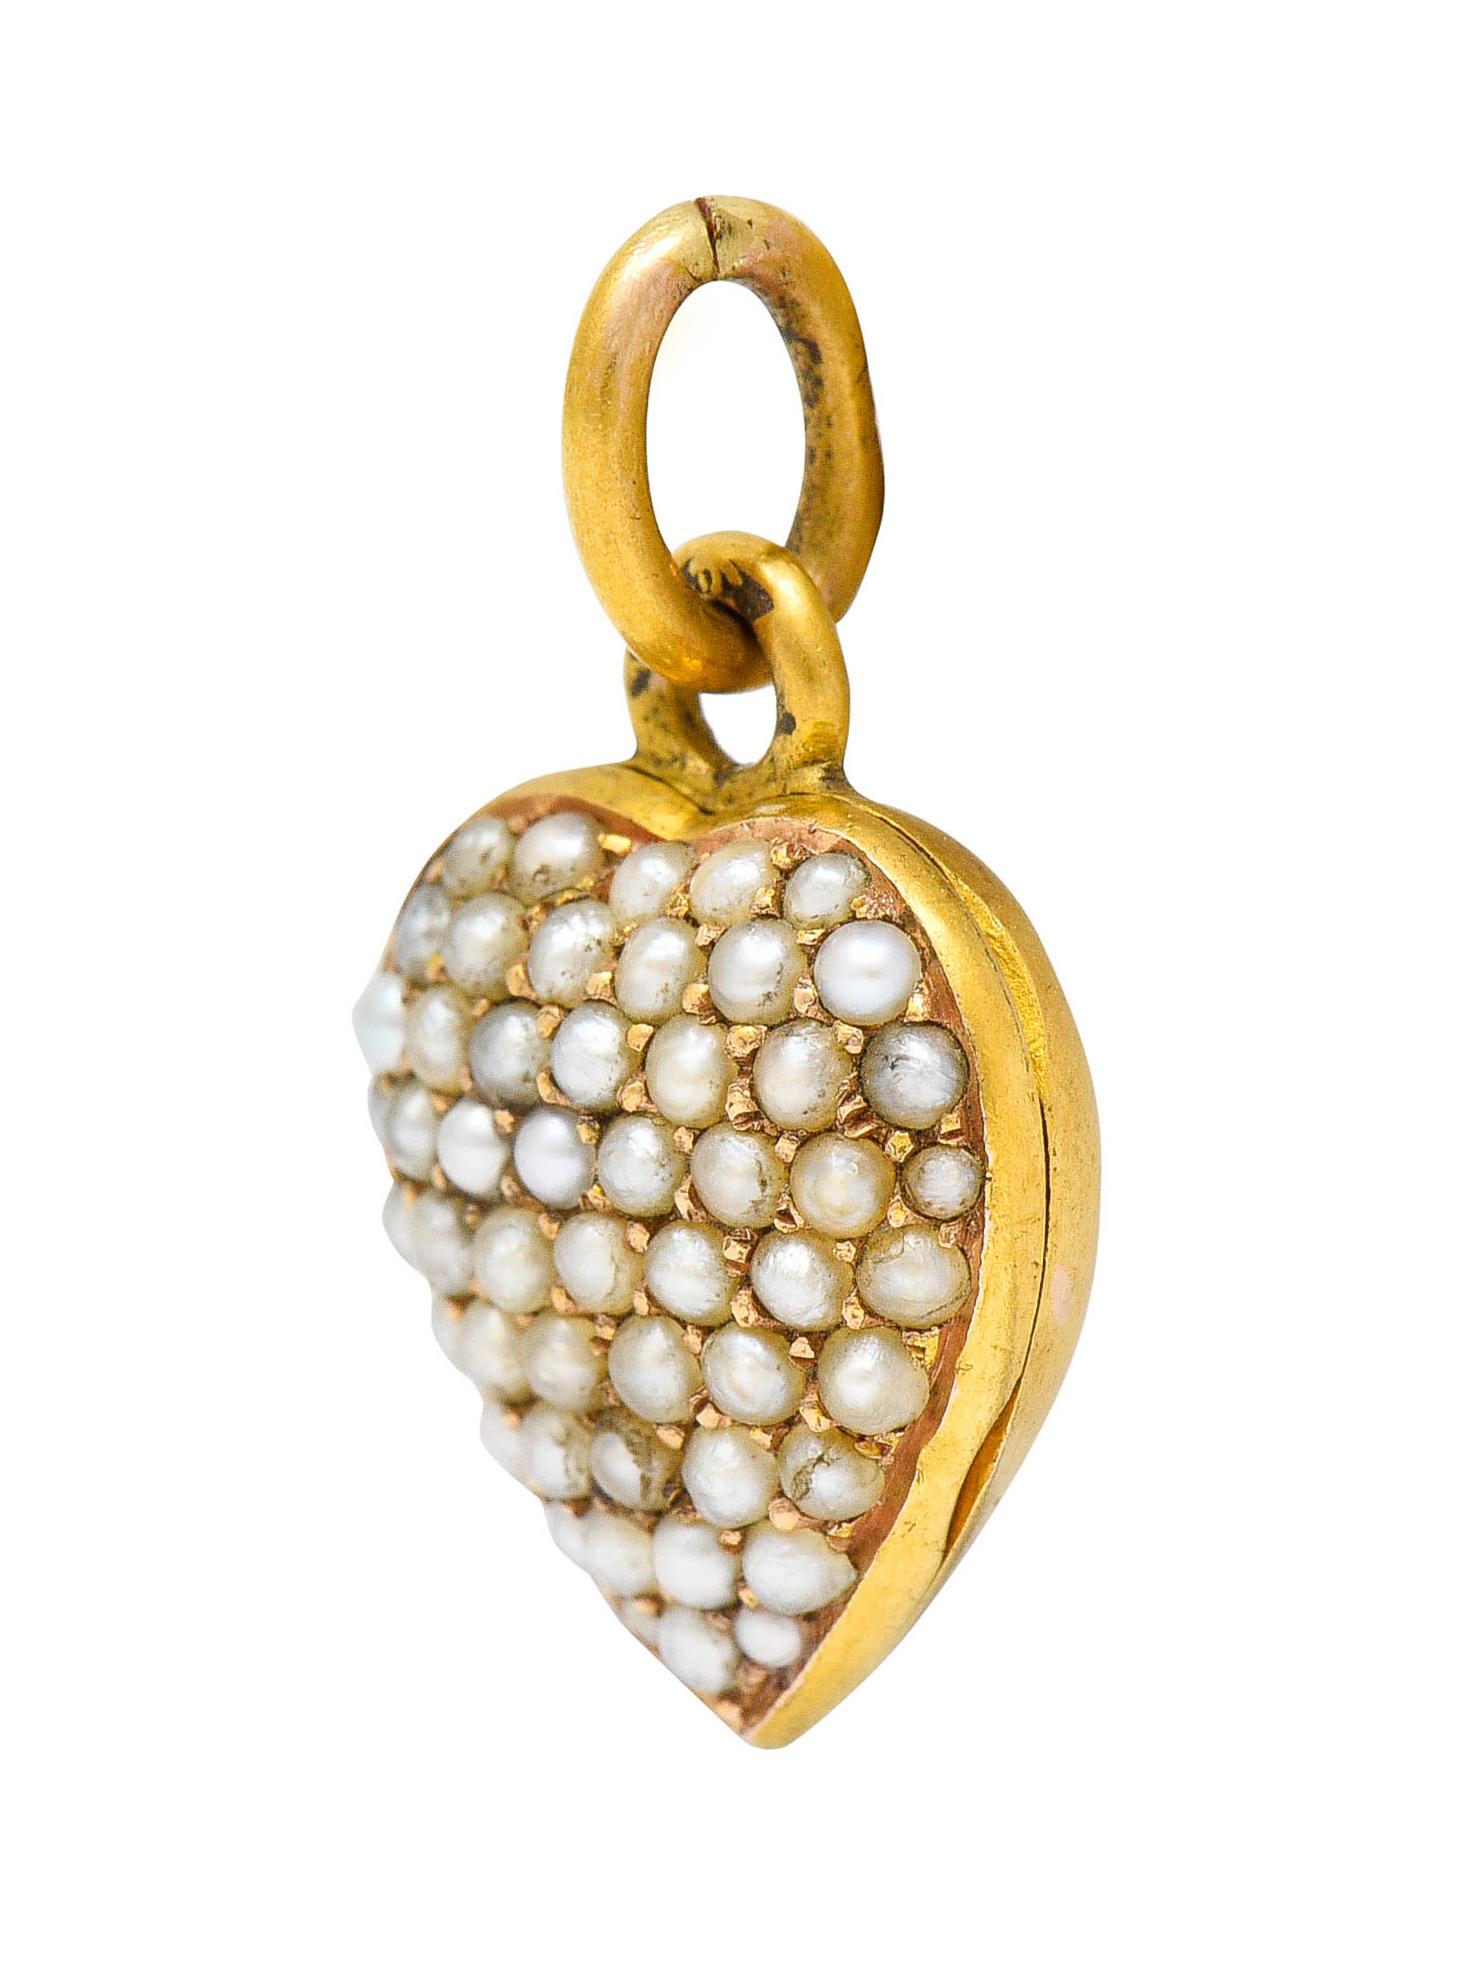 Heart shaped charm is set to front with natural freshwater pearls

1.5 mm in size with cream to white body color and good luster

Opens on a hinge to reveal to heart shaped recesses - both with removable glass covers

Maker's mark and tested as 18